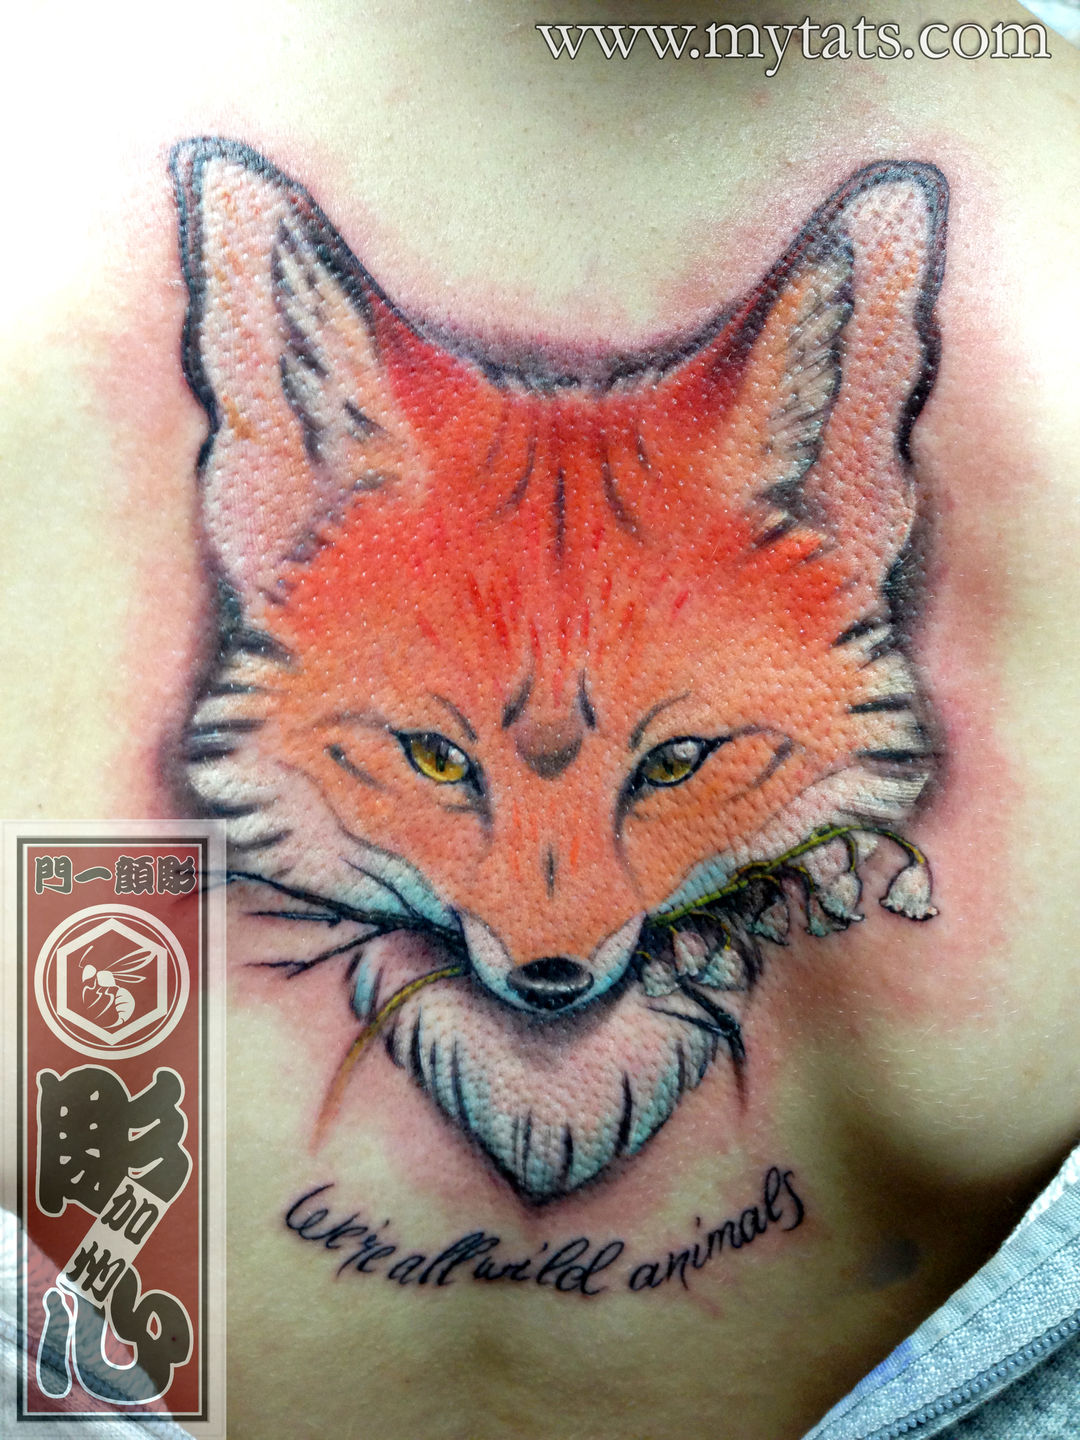 This was done at Colts Timeless Tattoos in the Fox Valley Mall  Timeless  tattoo Tattoos Maple leaf tattoo